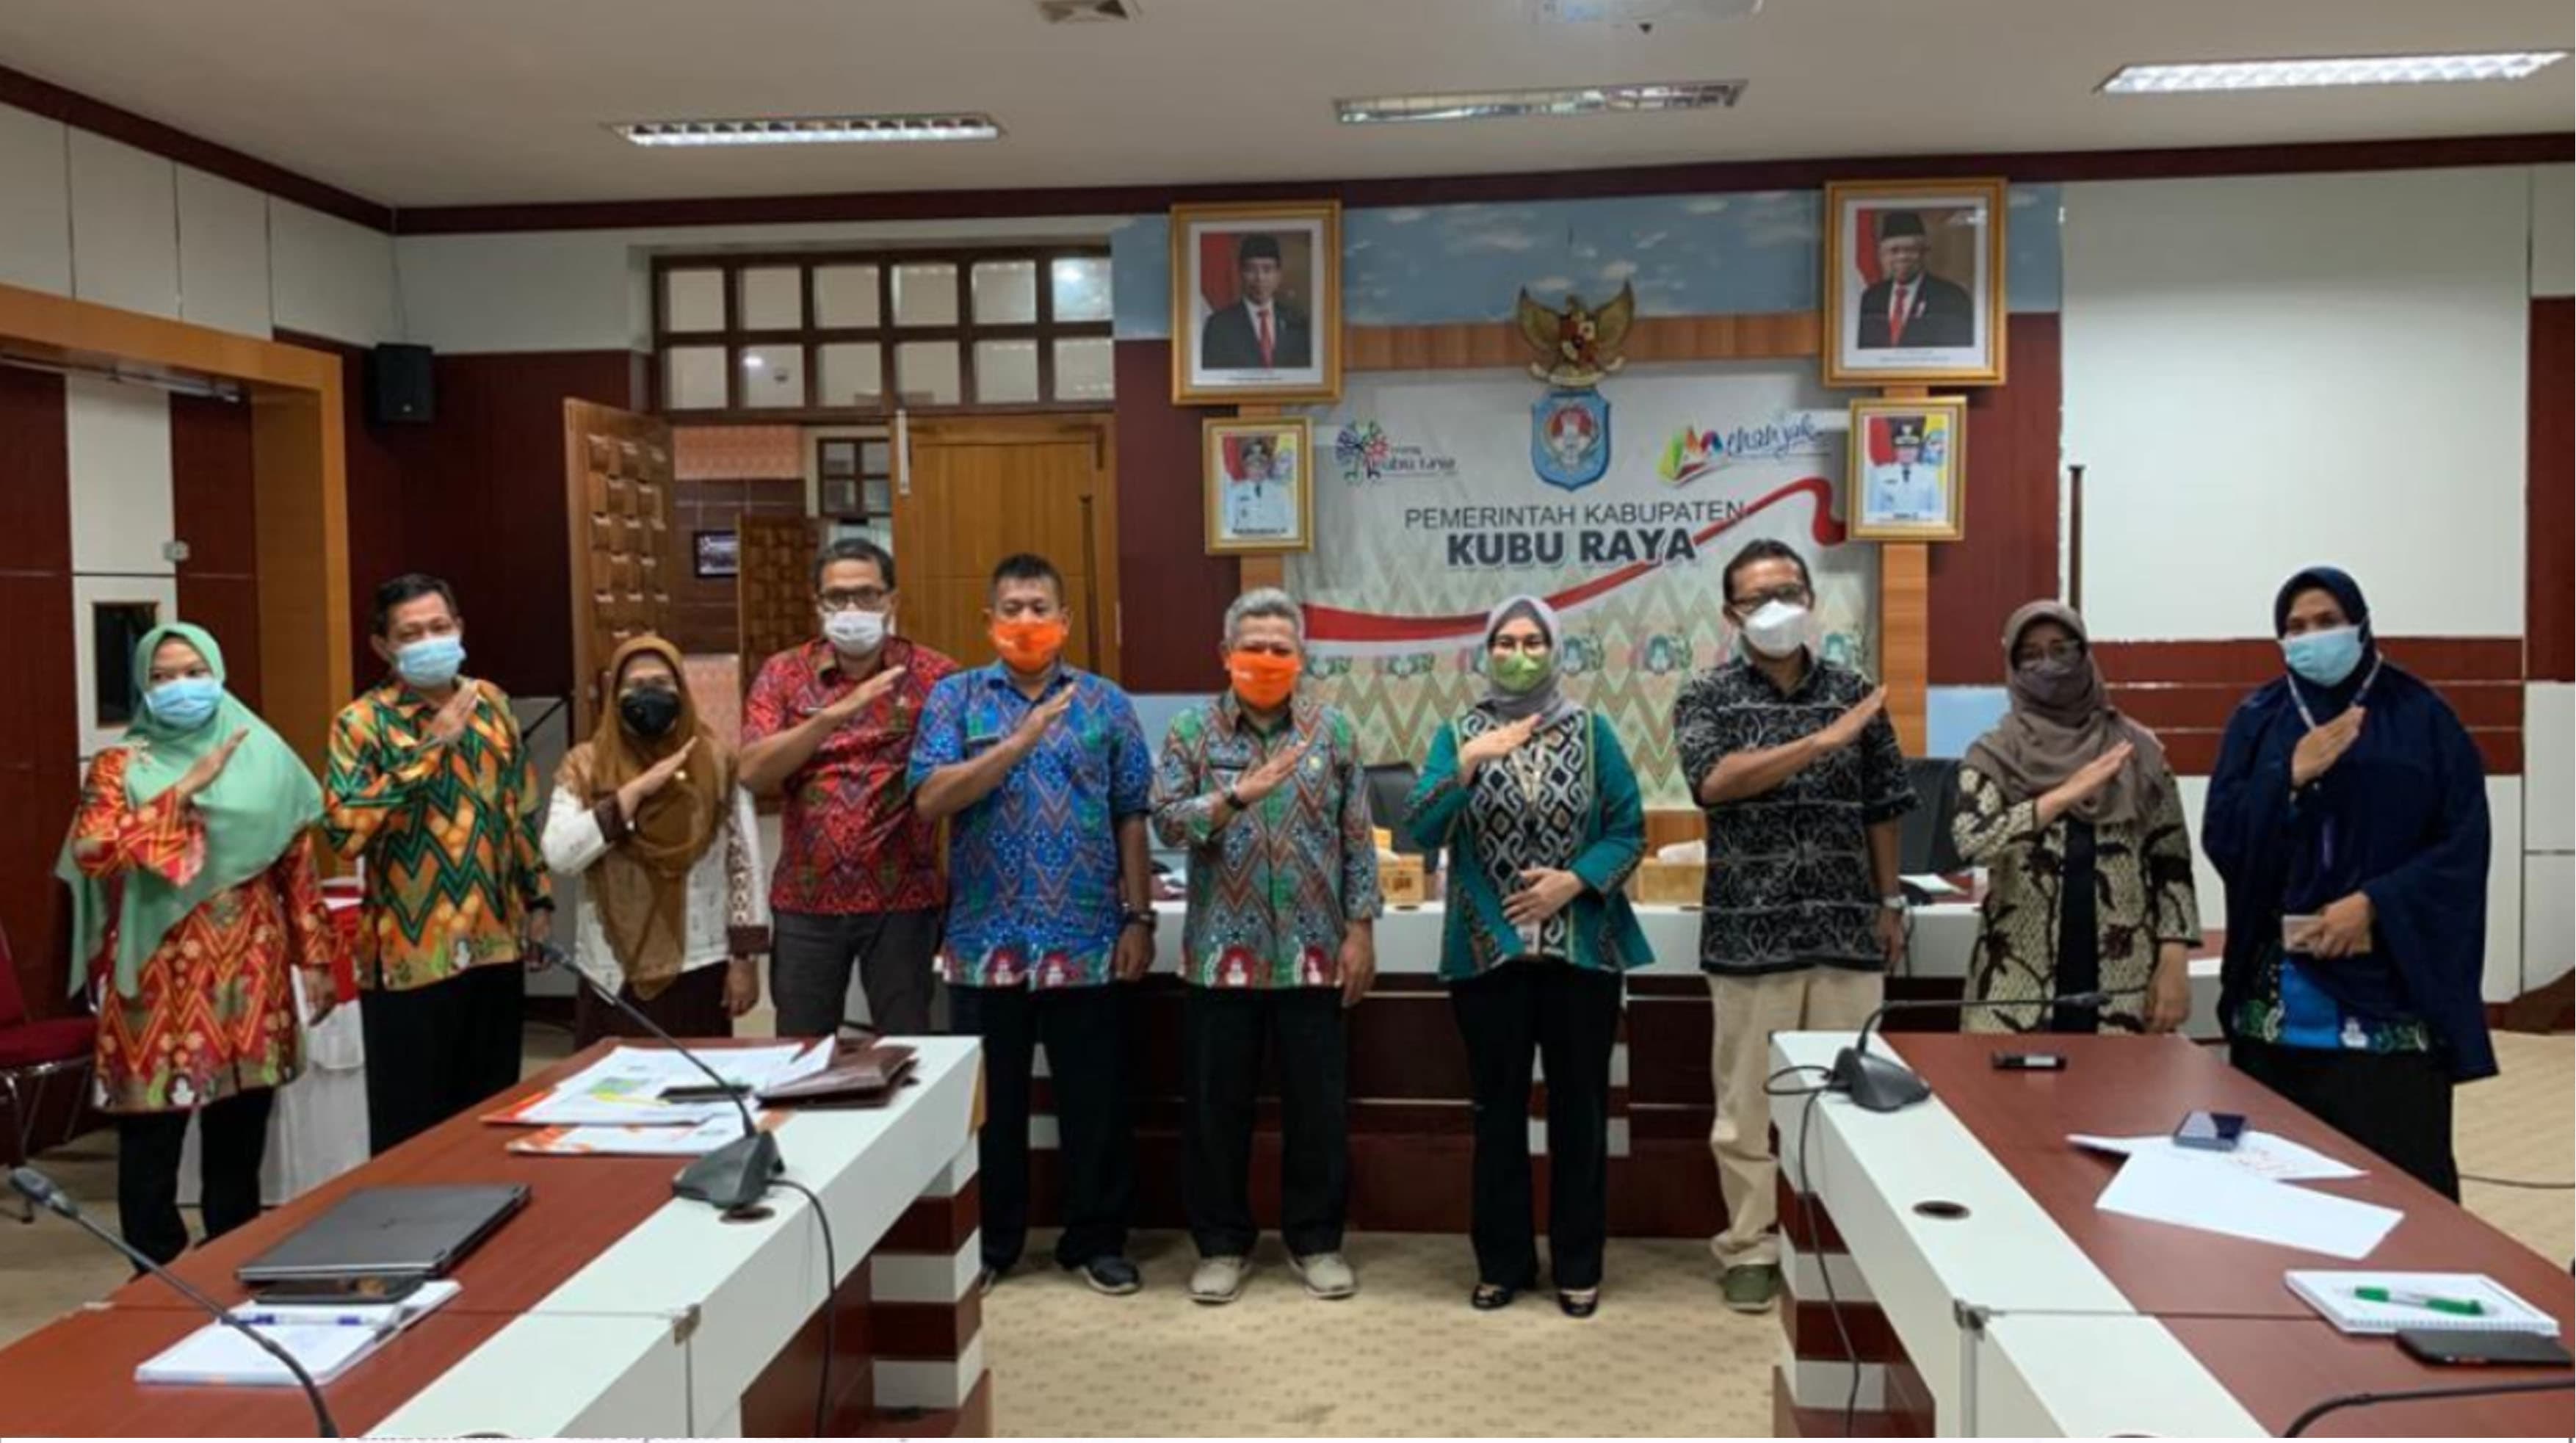 Study of Applied Institutional Working Groups for Accelerating the Implementation of Green Growth in Kubu Raya Regency to the Joint Secretariat of the PPI Compact in Ketapang Regency